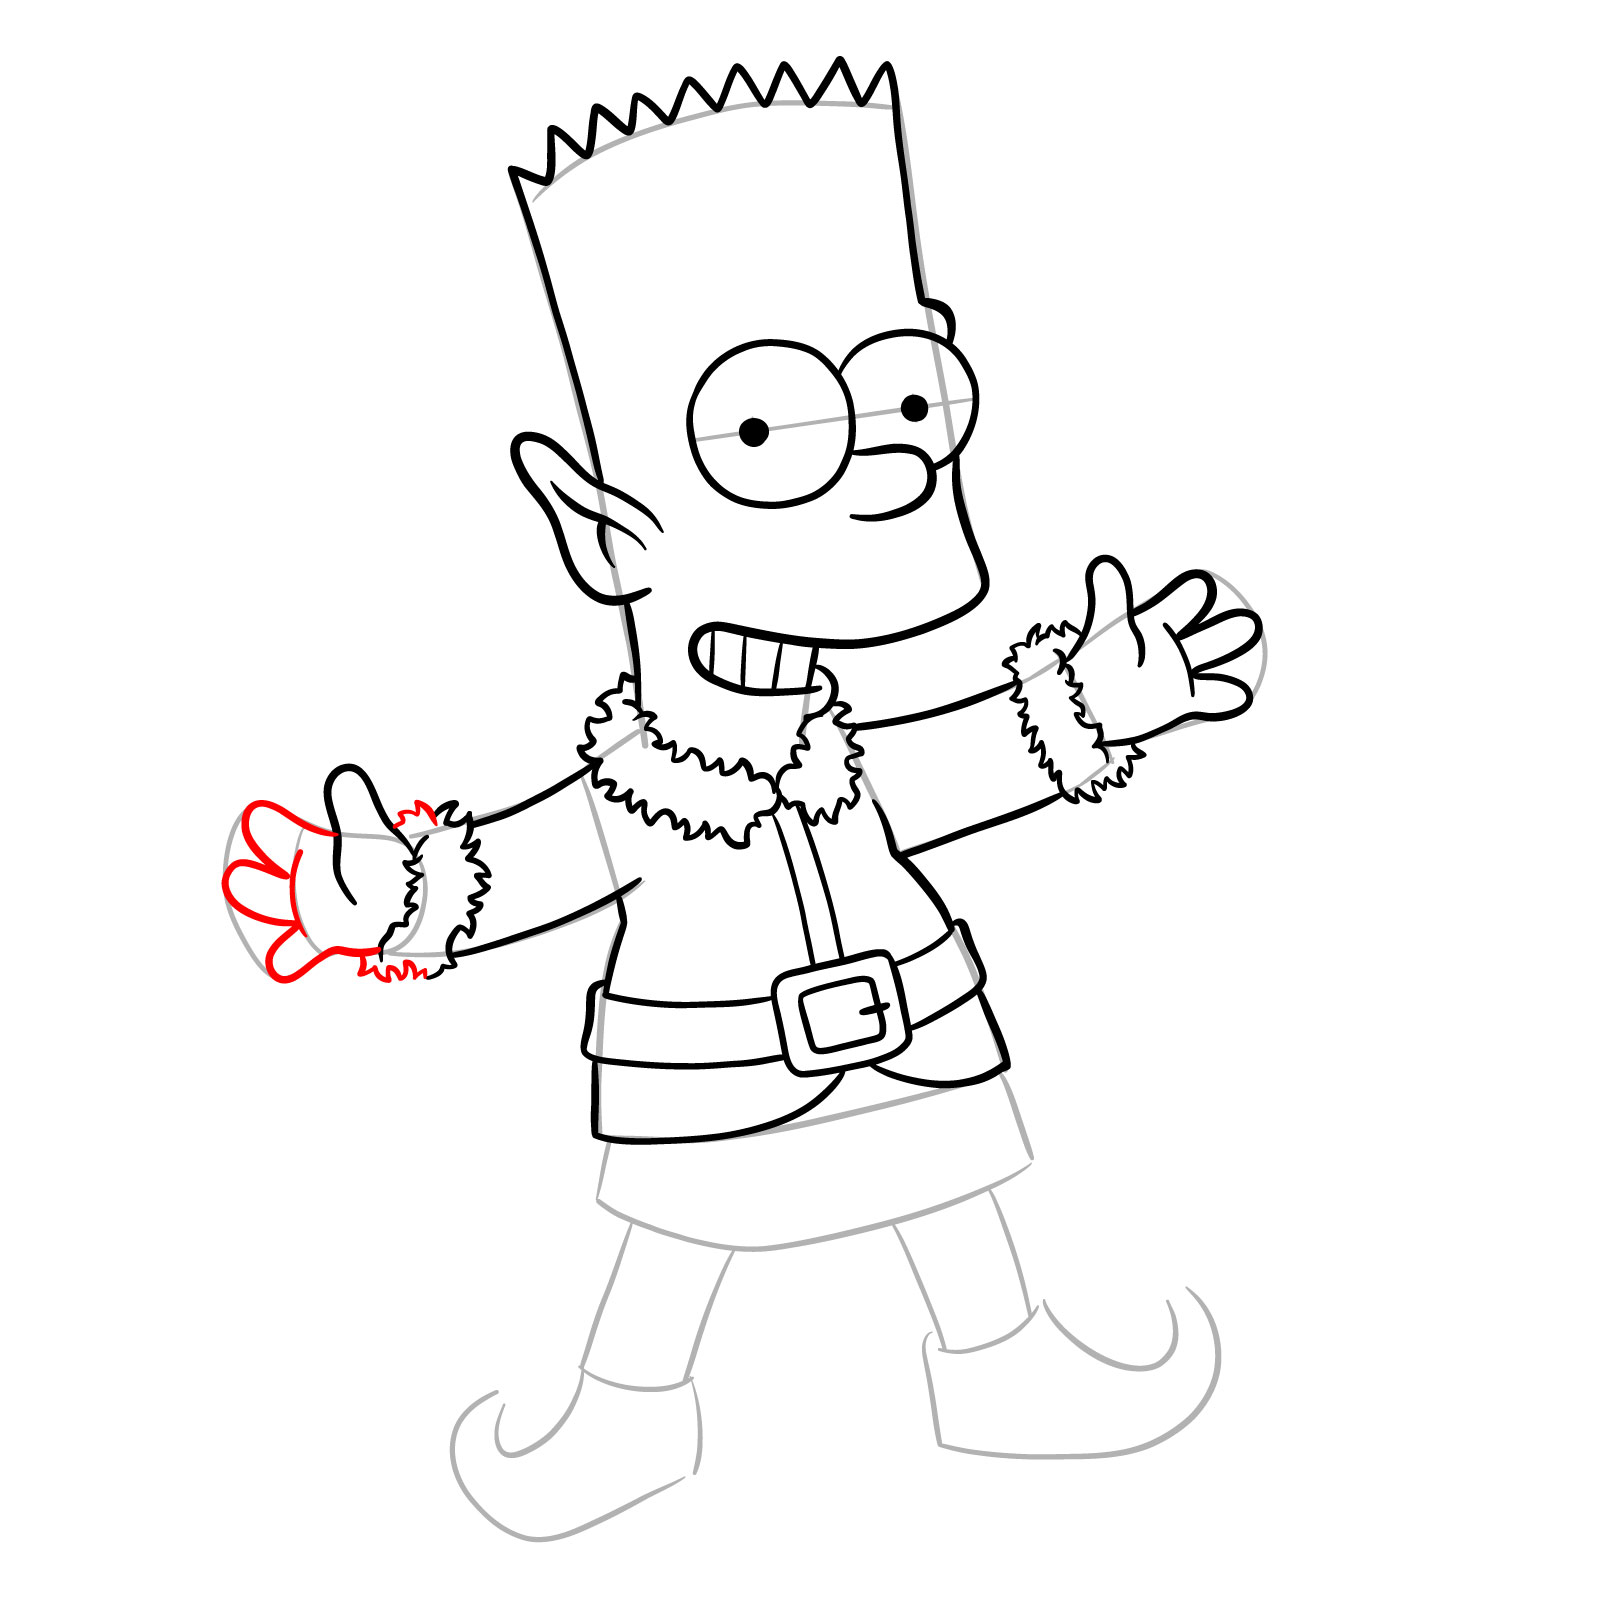 How to draw Bart Simpson as a Christmas Elf - step 23